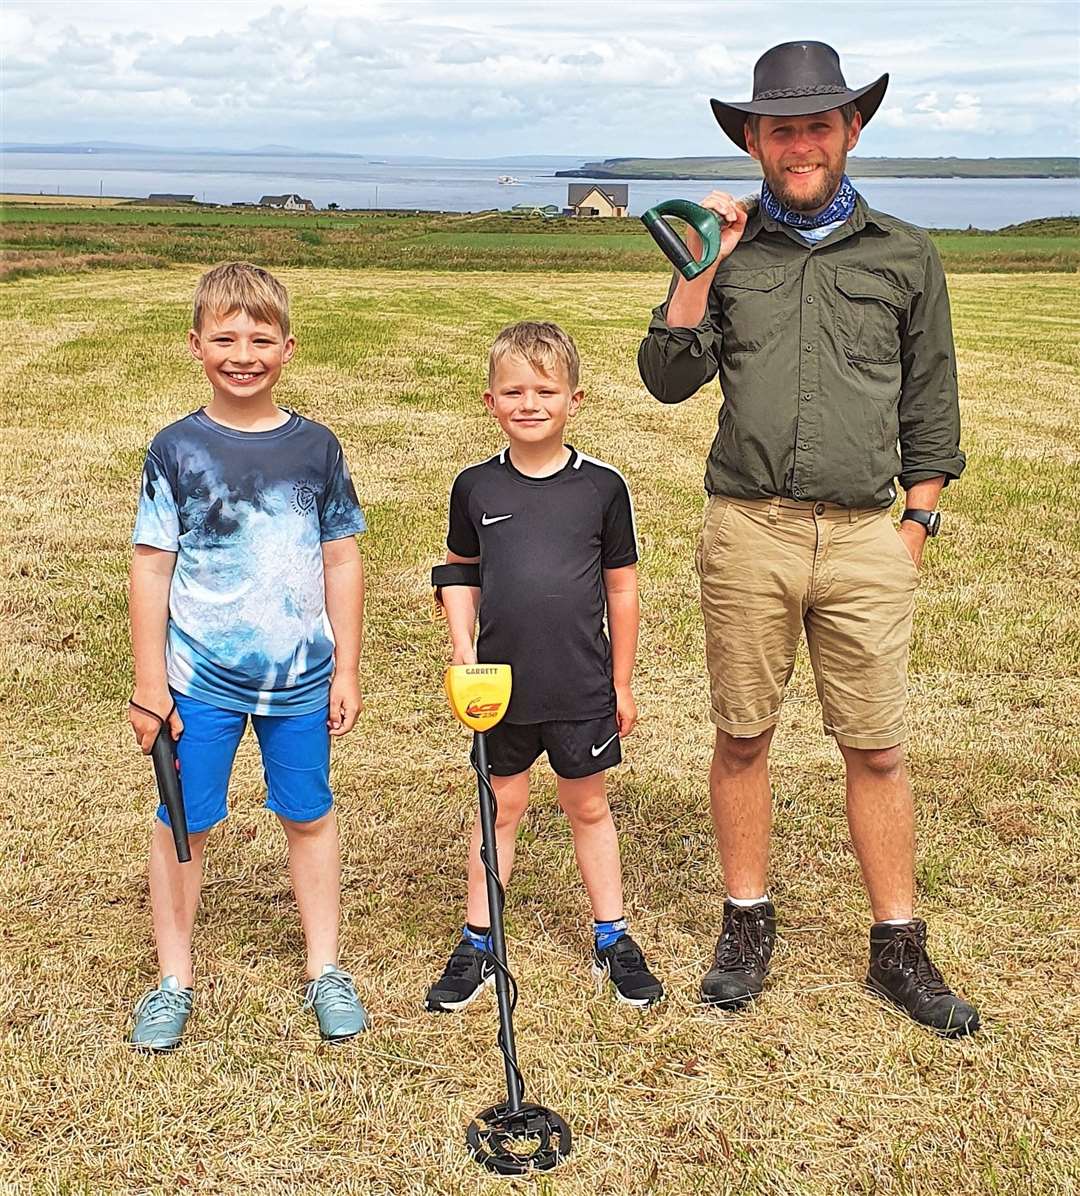 Chris Aitken out metal detecting with with his sons Callum, right, and Finlay.